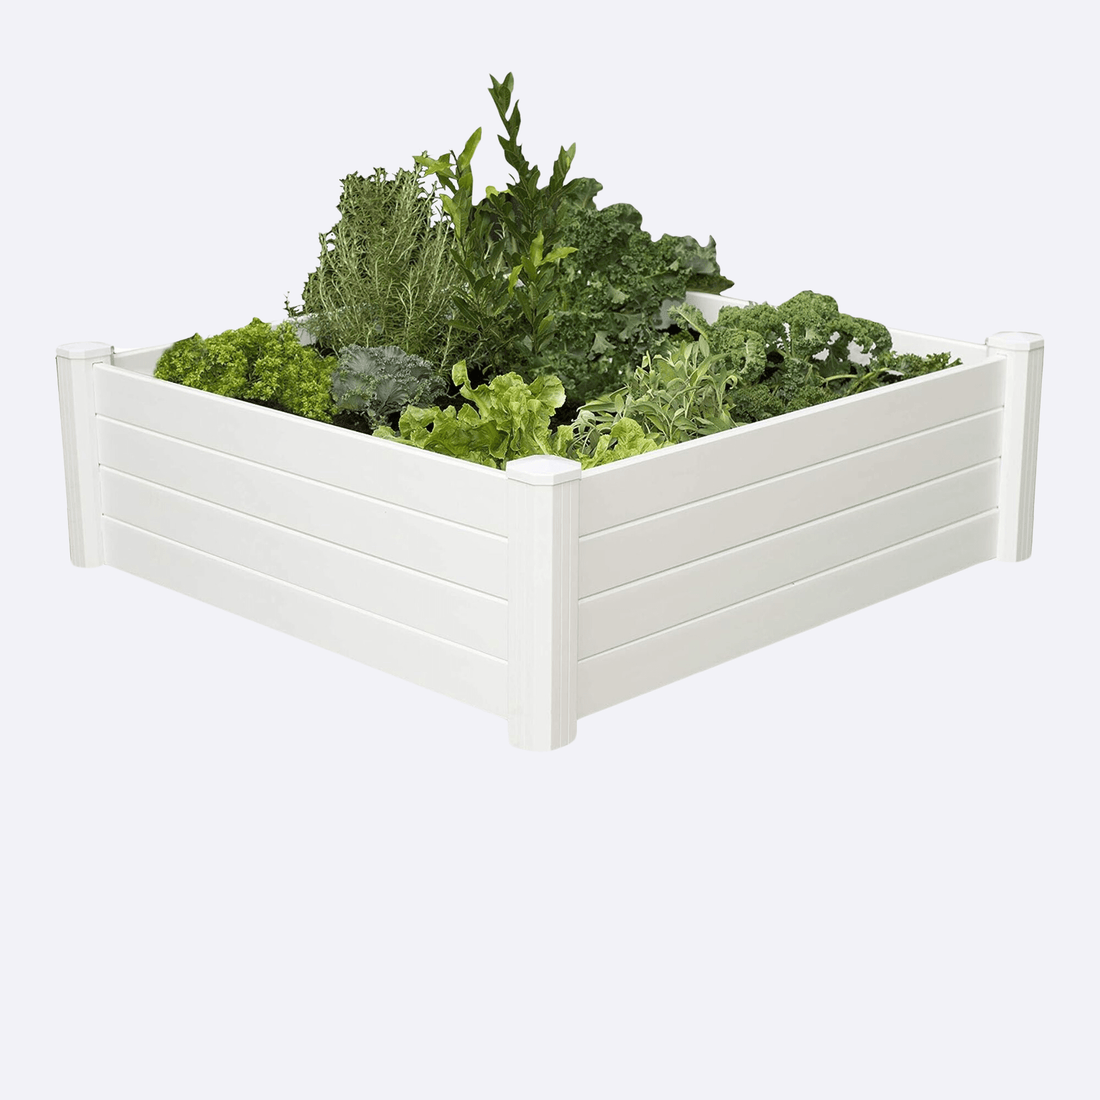 Horti Cubic 4'x4'x11 Resin Garden Bed with Grow Grid - Horti Cubic